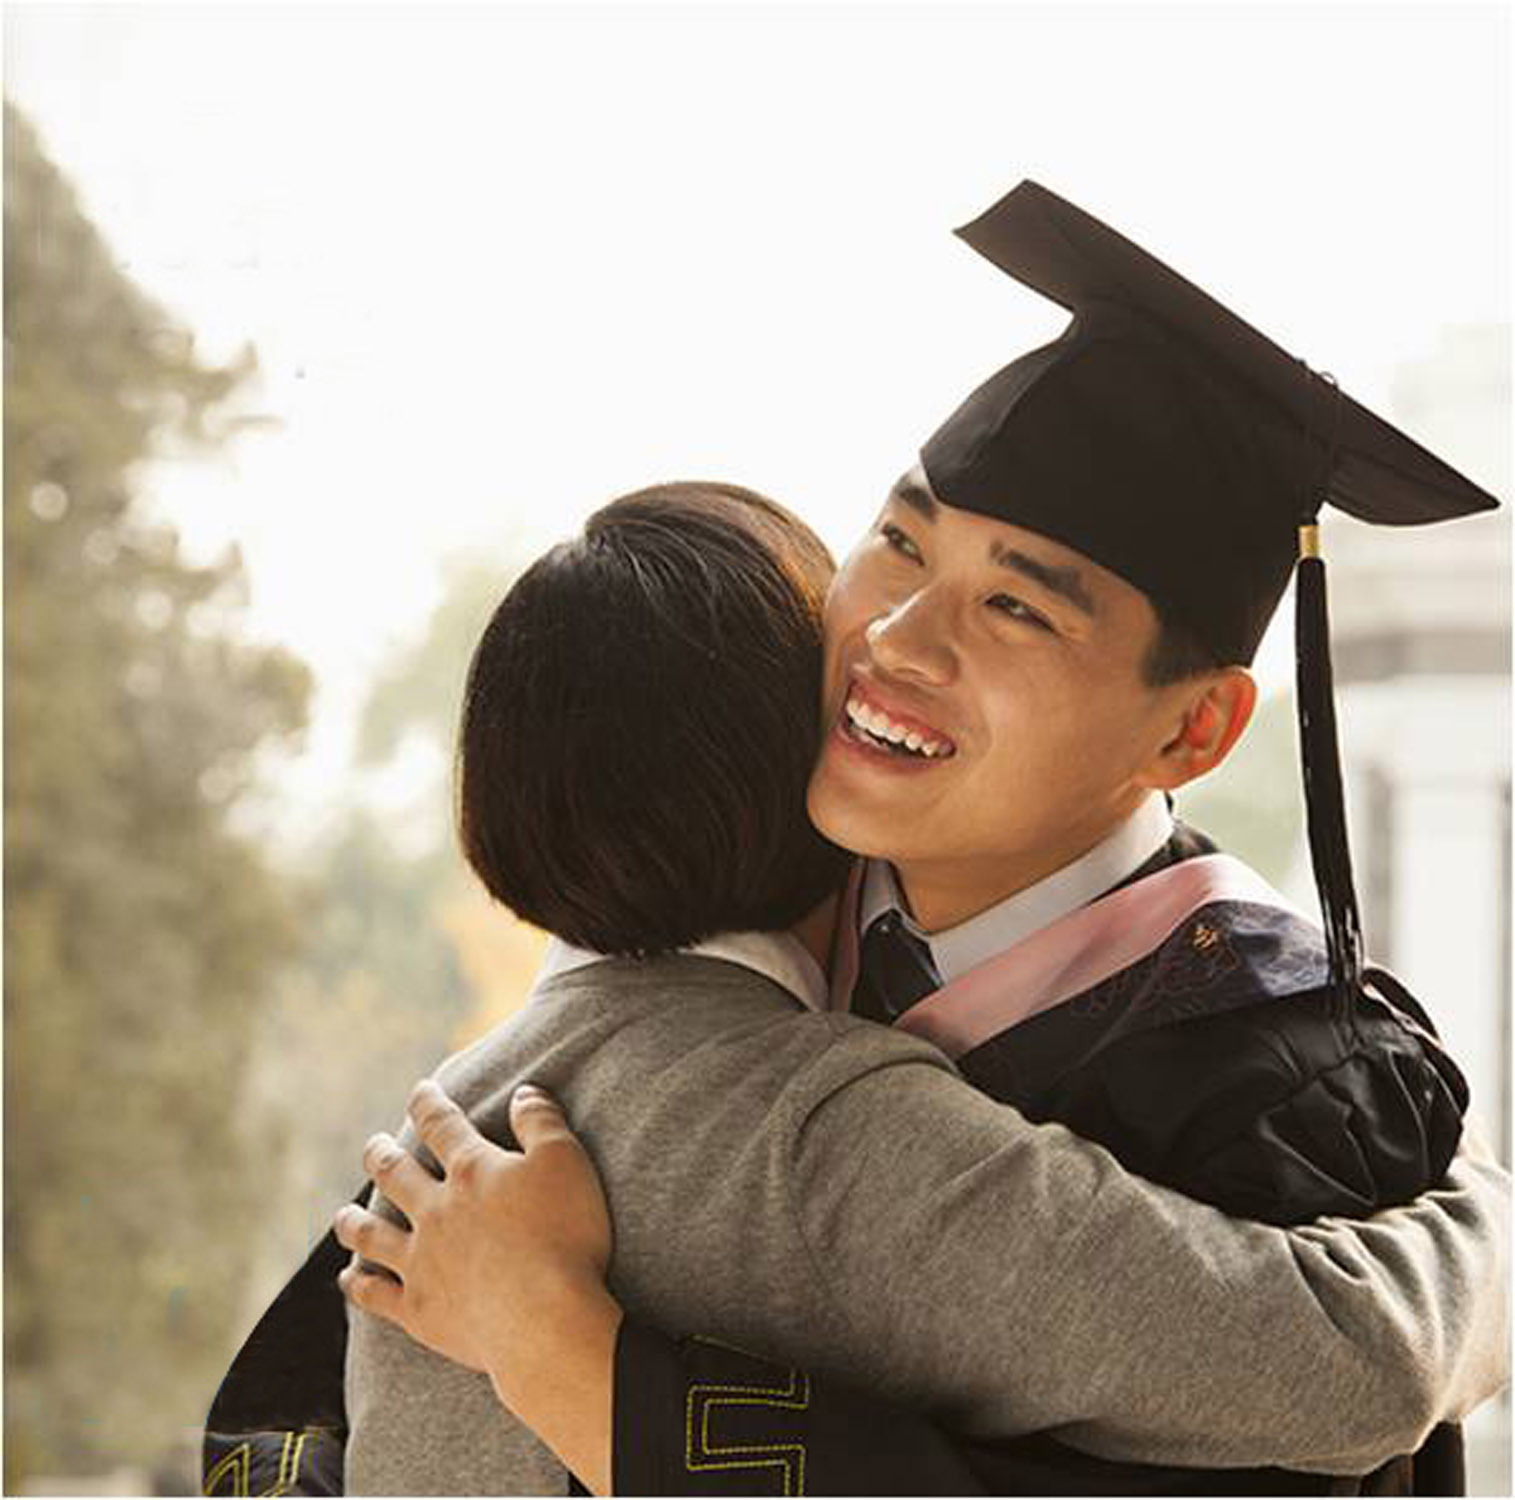 Shop with Citi Credit Card to reward your graduates with a special gift